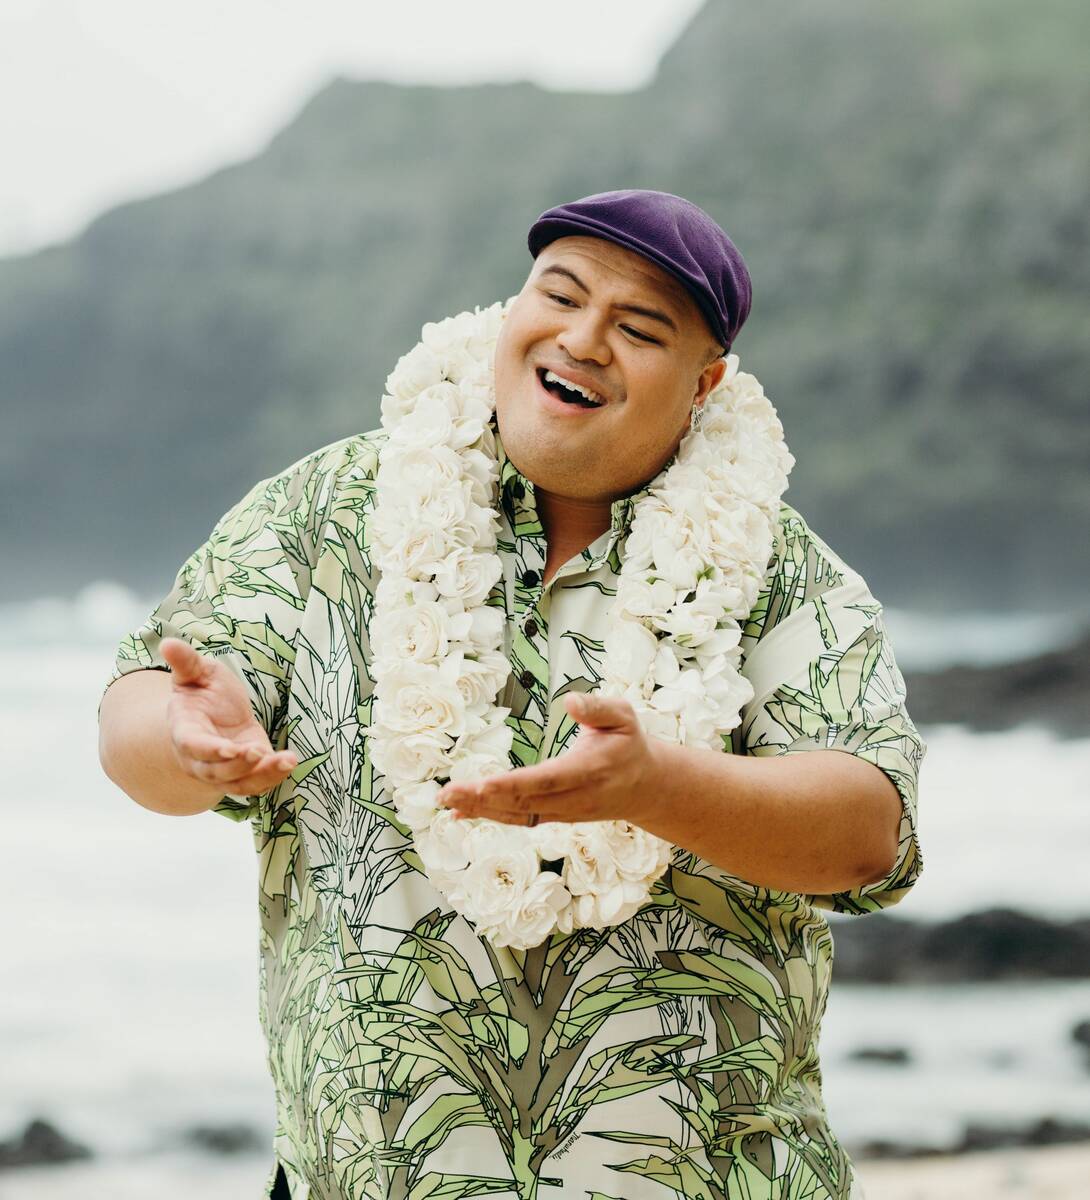 Two-time Grammy Award-winning artist Kalani Pe'a is headlining two shows Sunday at Myron's at t ...